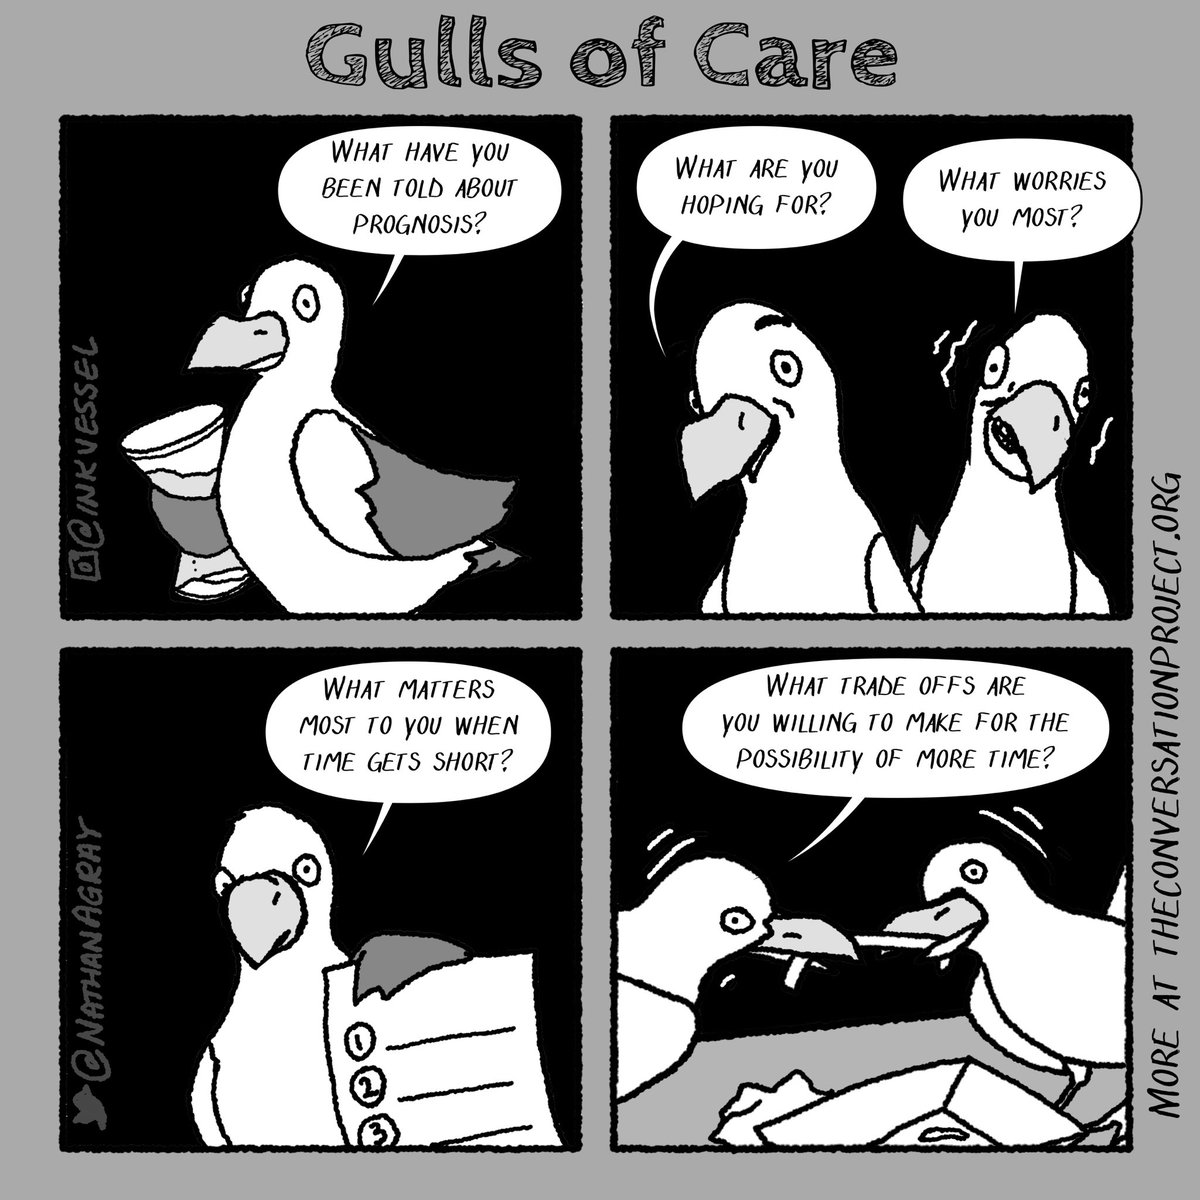 Re-share for National Health Care Decision Day… My apologies to both humans and birds for the bad “gulls” pun. #NHDD